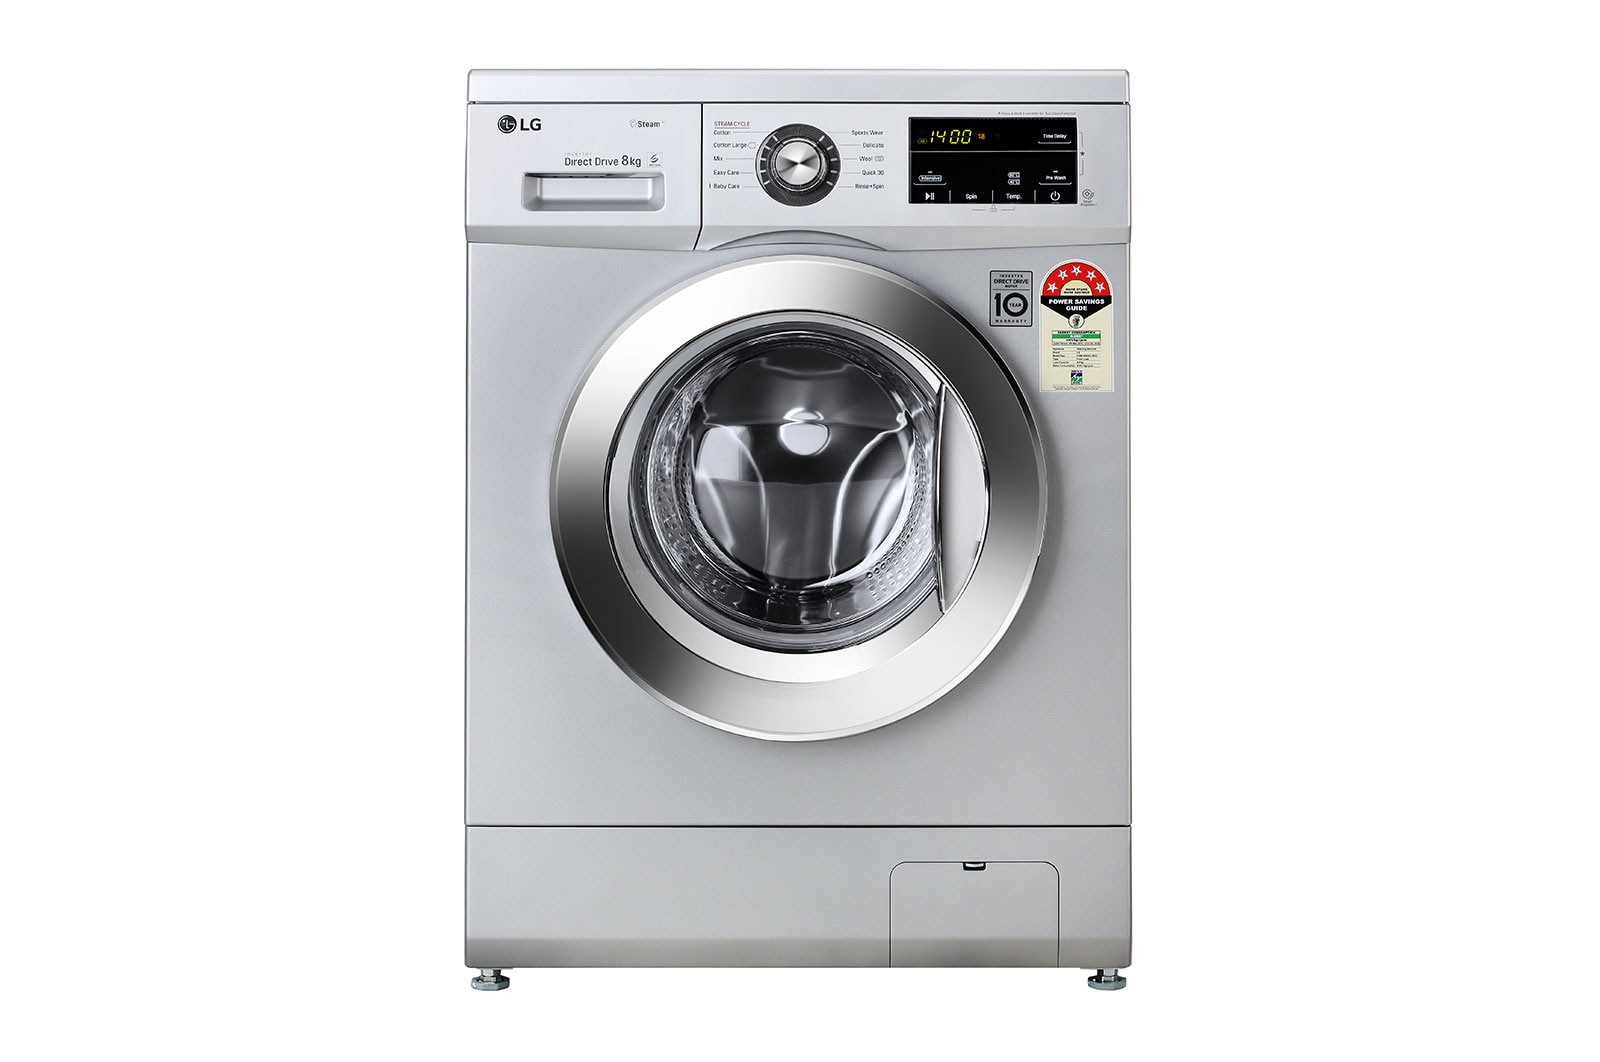 LG 8Kg Front Load Washing Machine, Inverter Direct Drive, Luxury Silver, FHM1408BDL